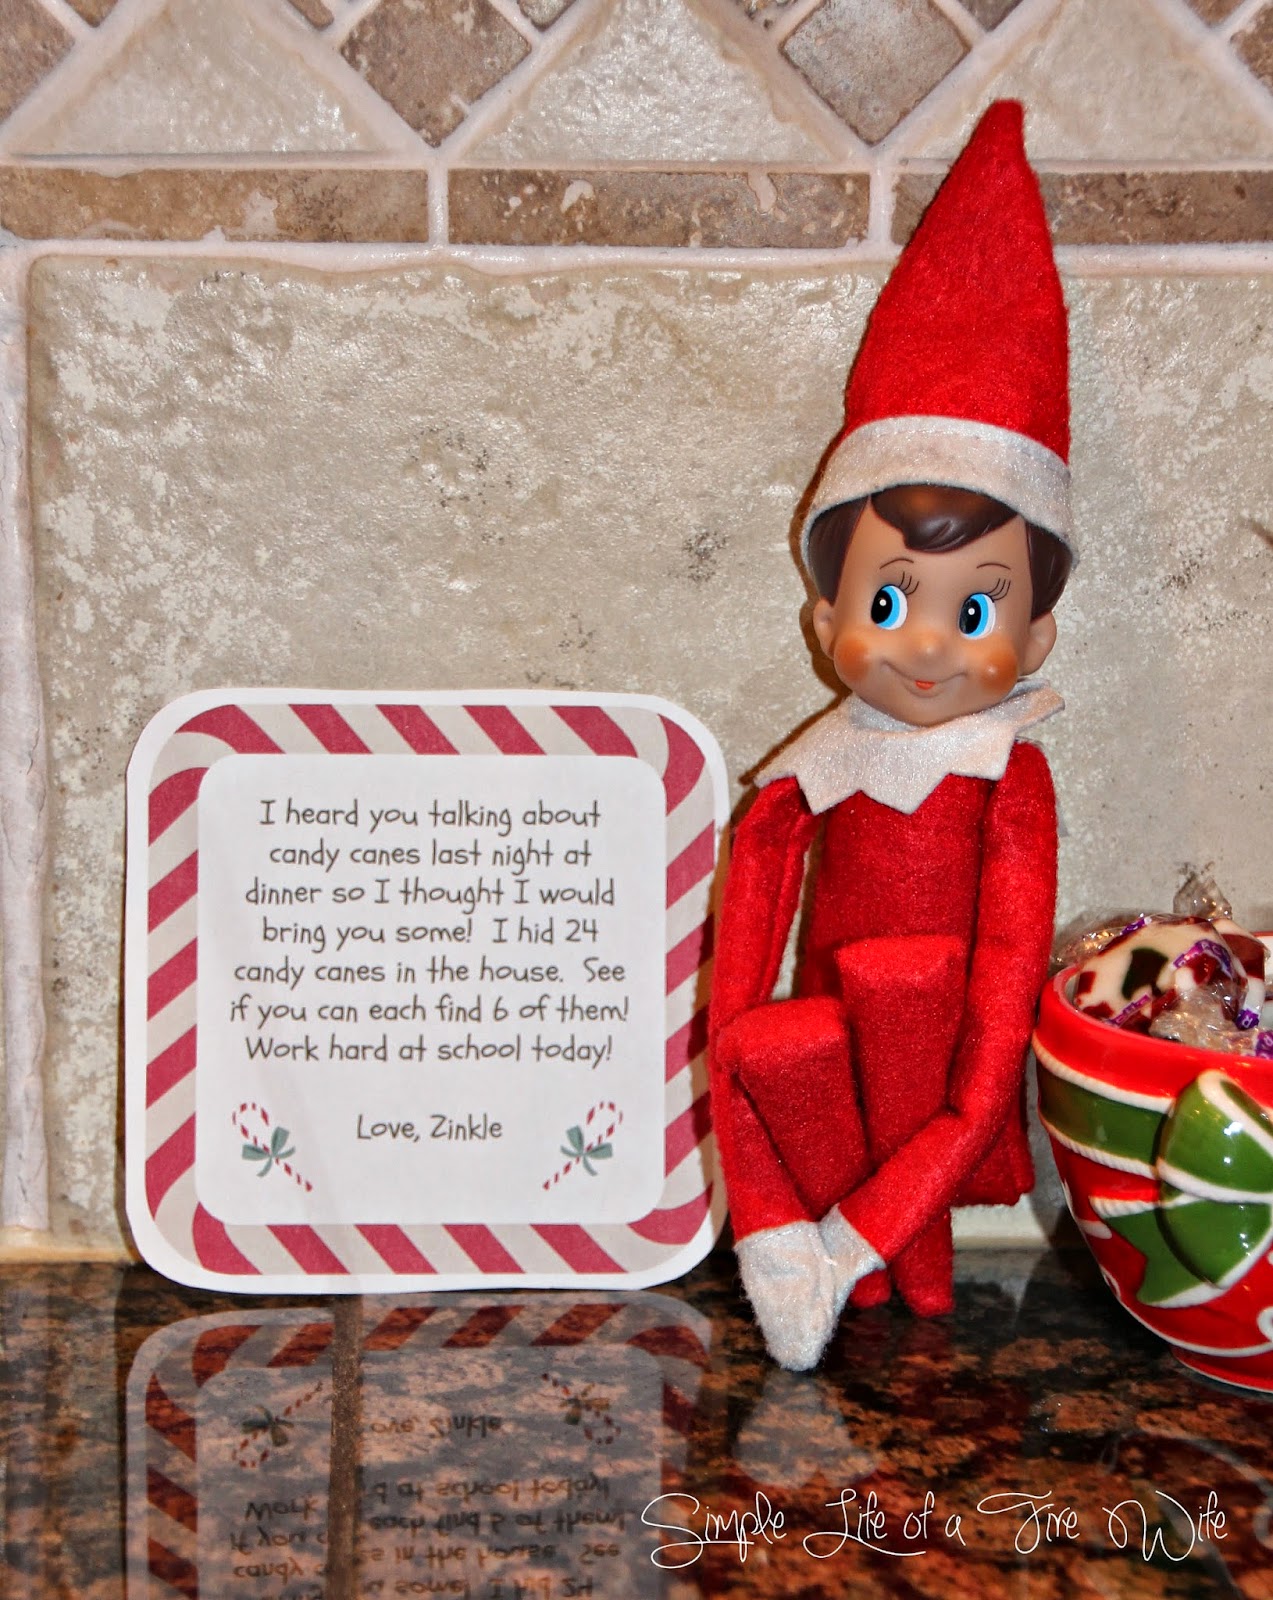 Simple Life of a Fire Wife: Elf on The Shelf: Hiding Candy Canes